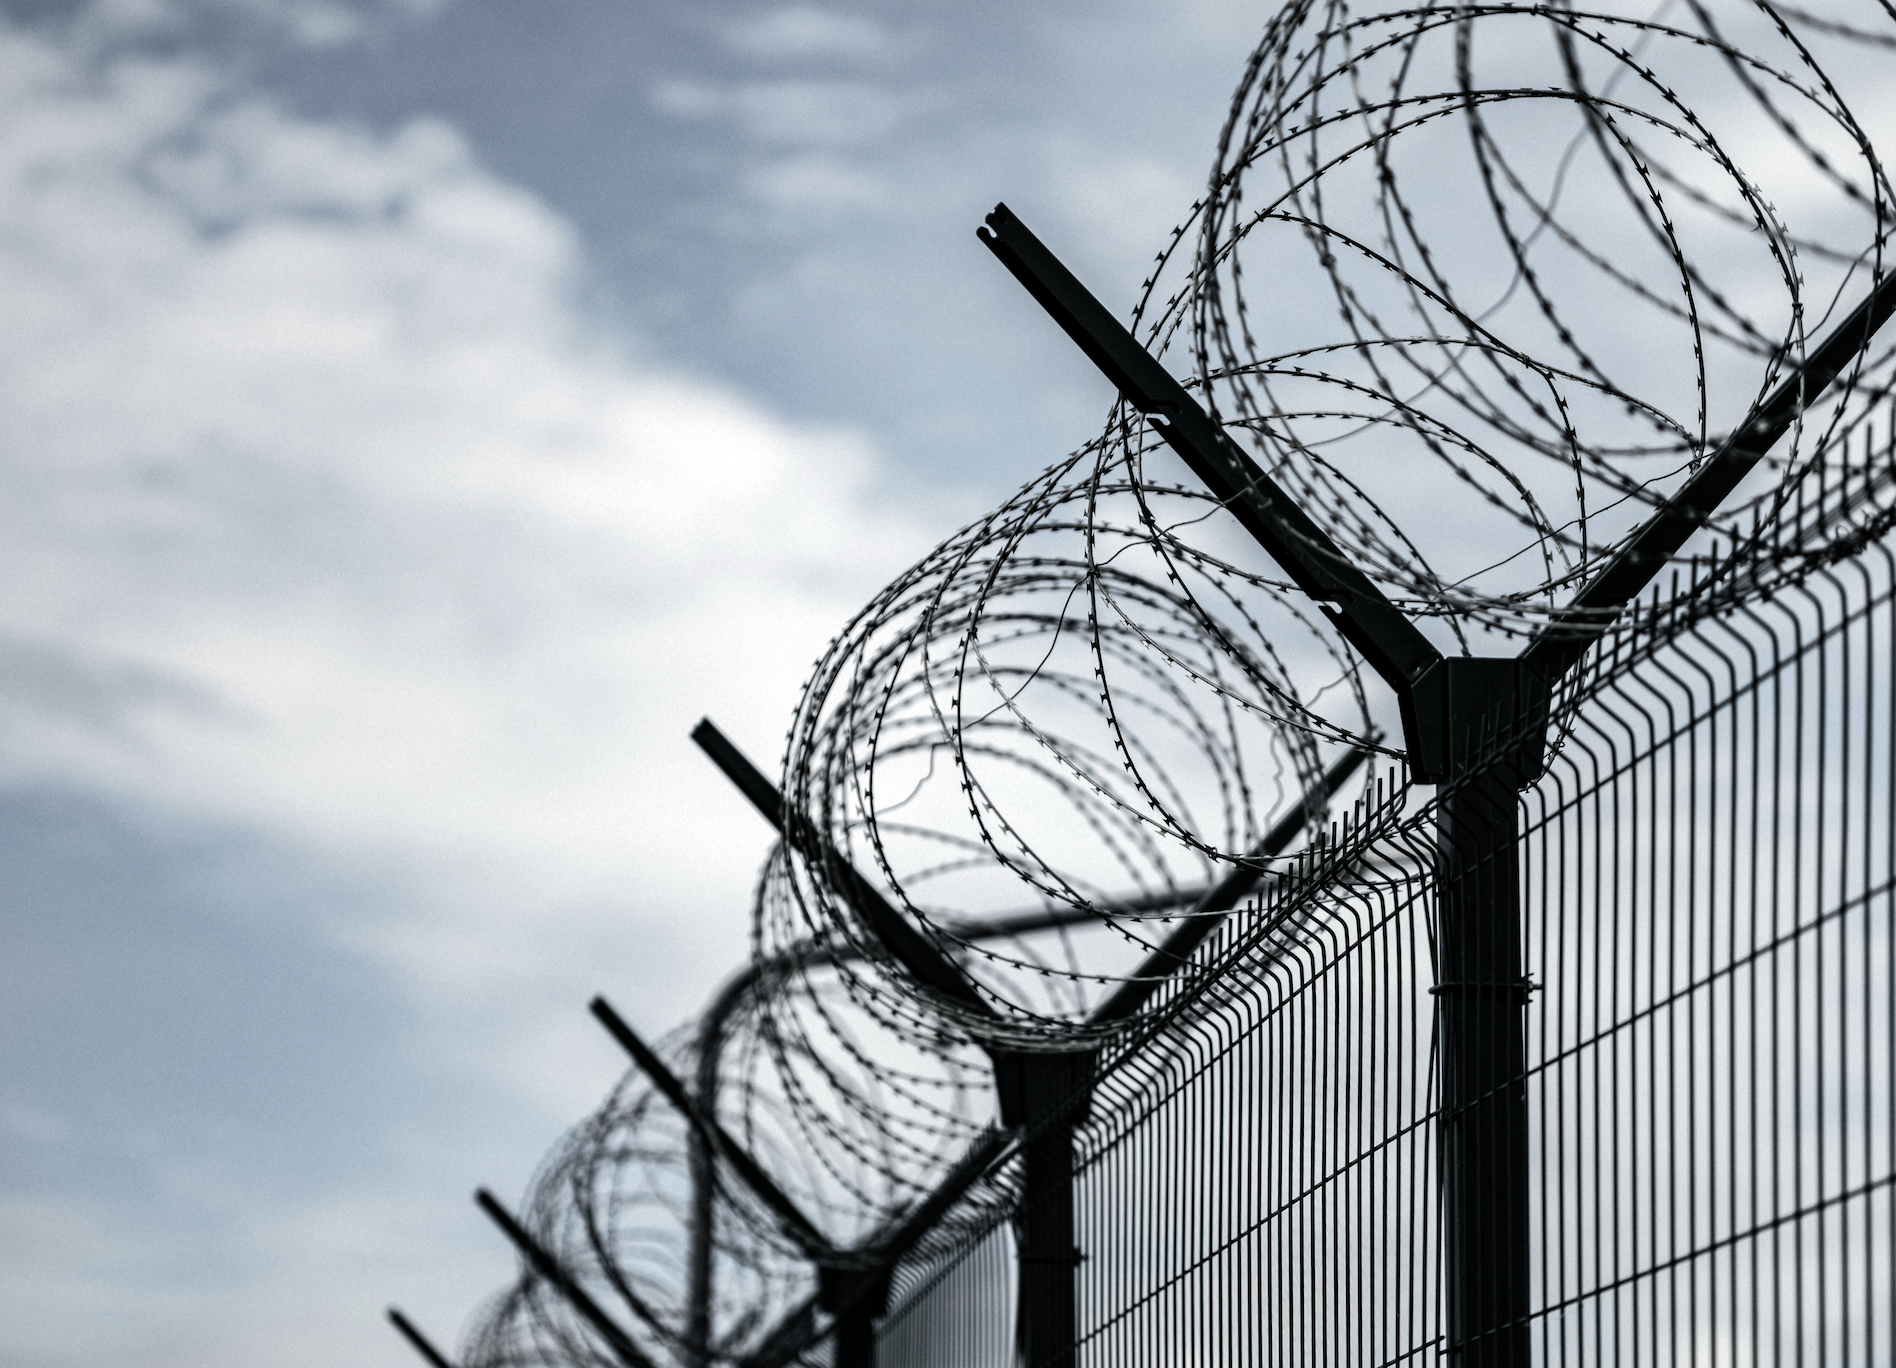 Barbed wire tops a security fence against a cloudy sky, suggesting a secure or restricted area